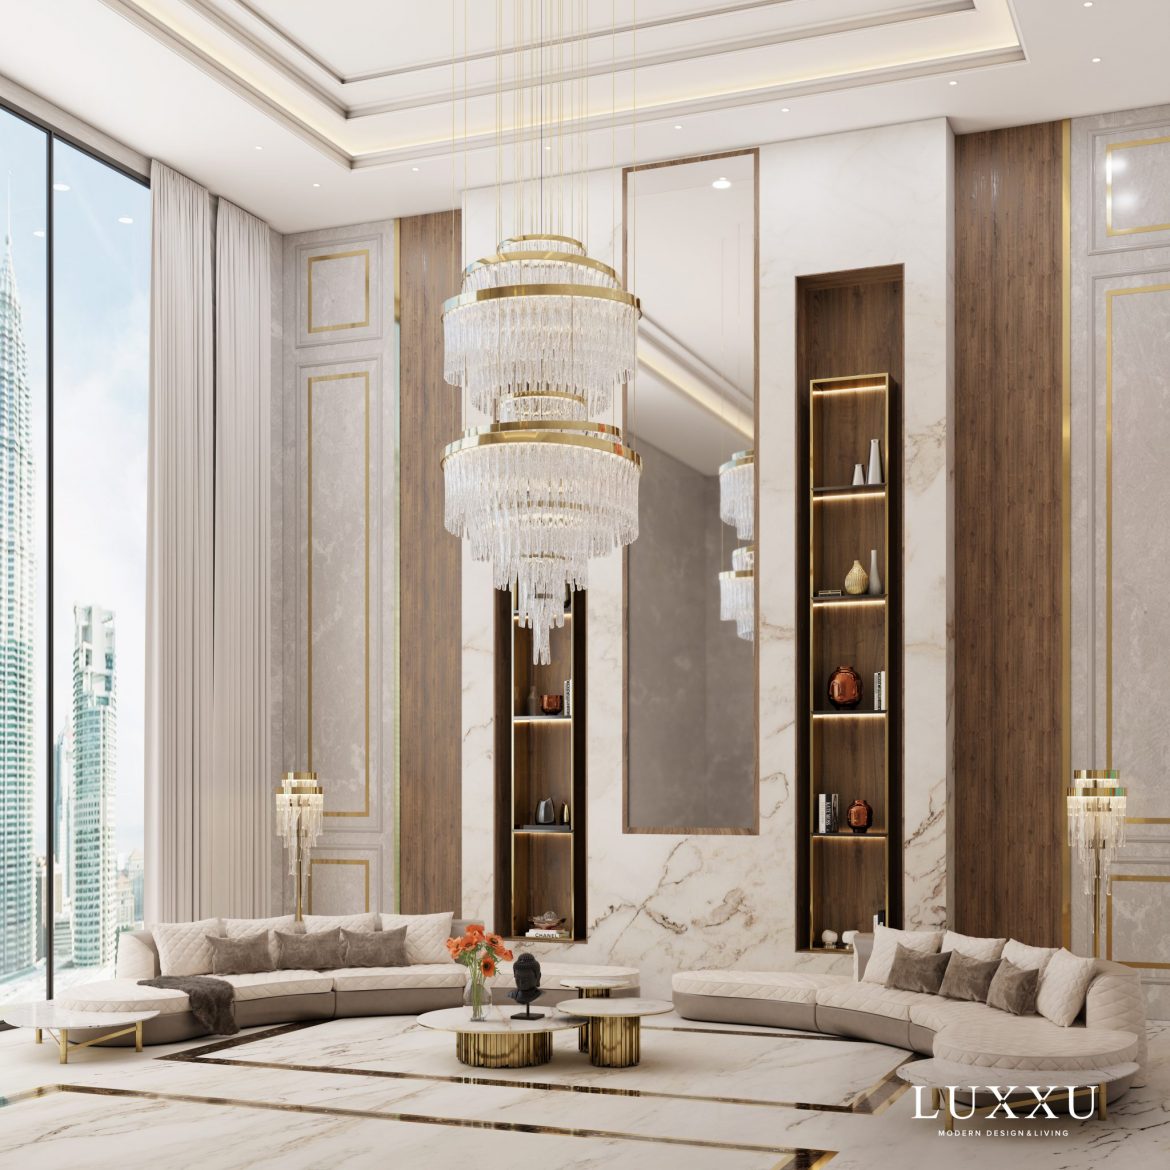 Luxury Houses: A Premium Design Collection